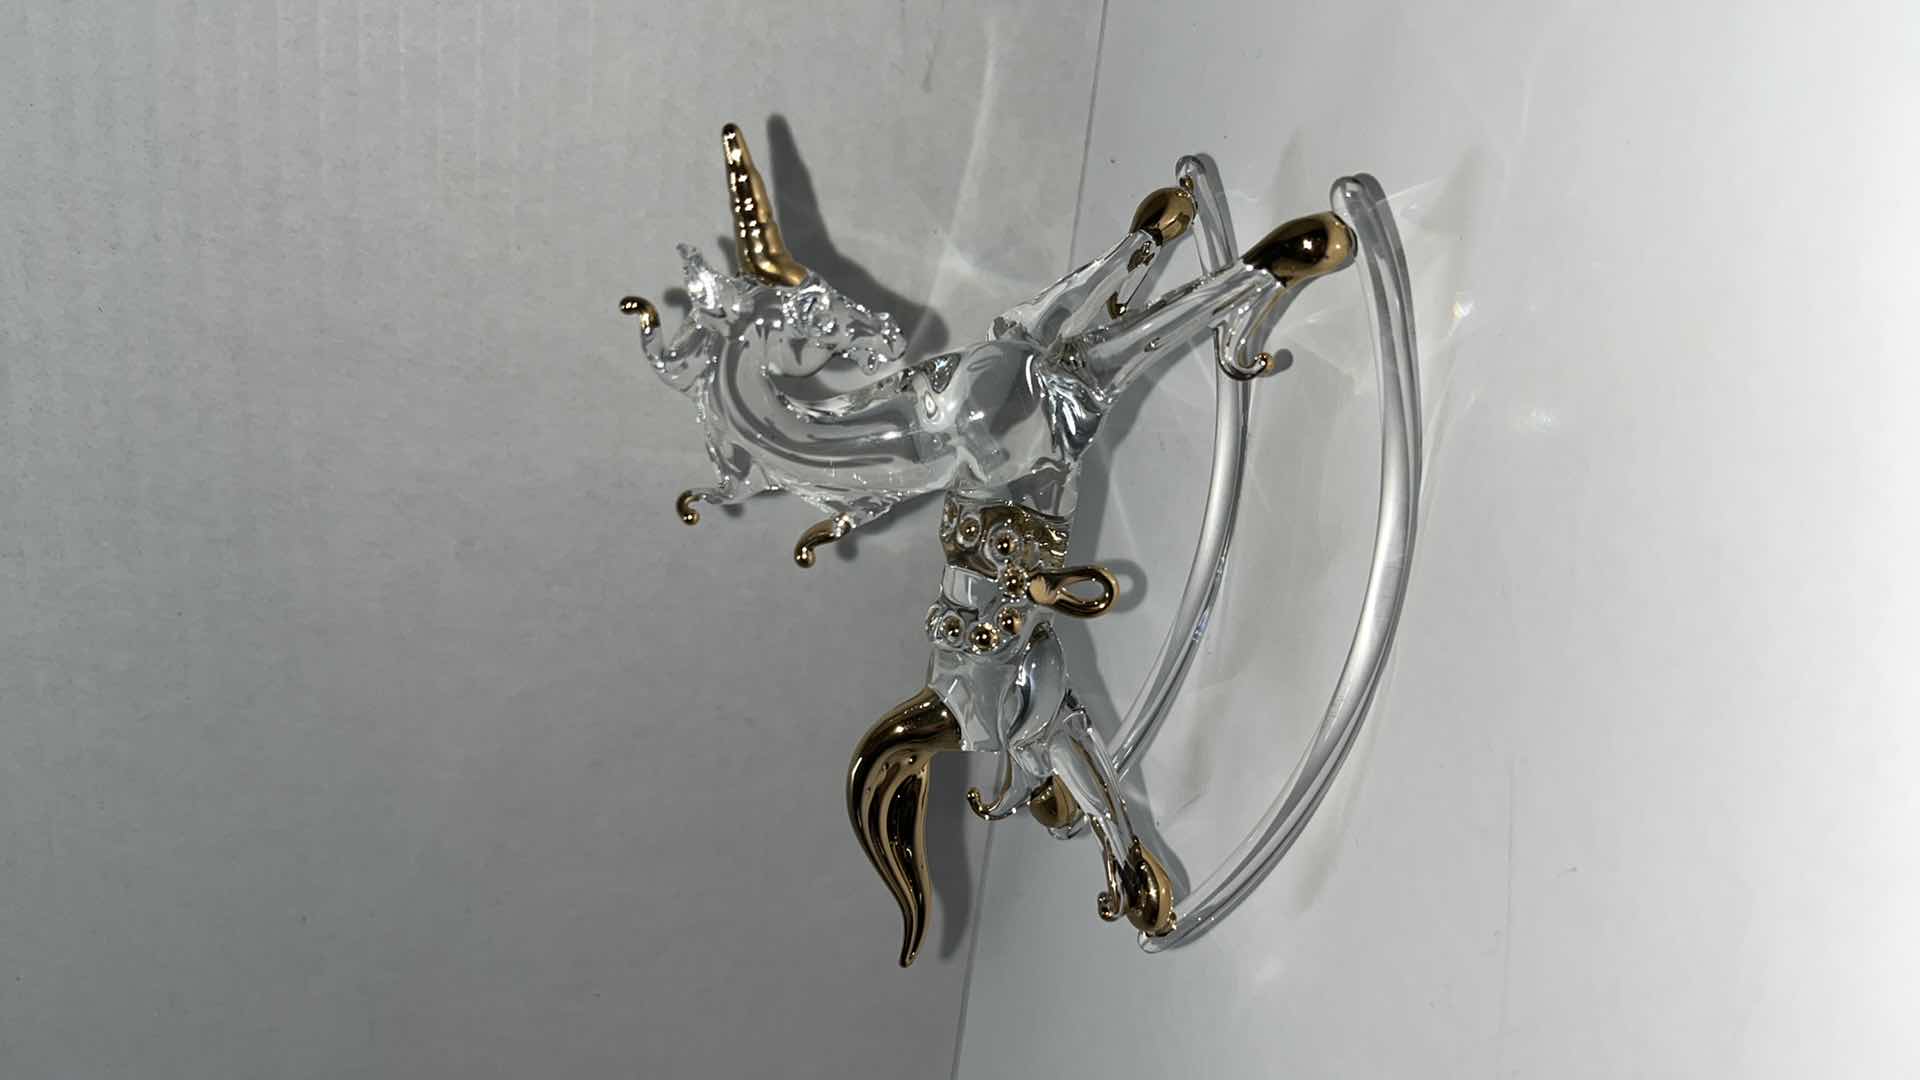 Photo 2 of HAND BLOWN CLEAR GLASS ROCKING UNICORN W GOLD ACCENTS 4.75” X 2” H4”W CRYSTAL ROCKING HORSE W GOLD ACCENTS (2)